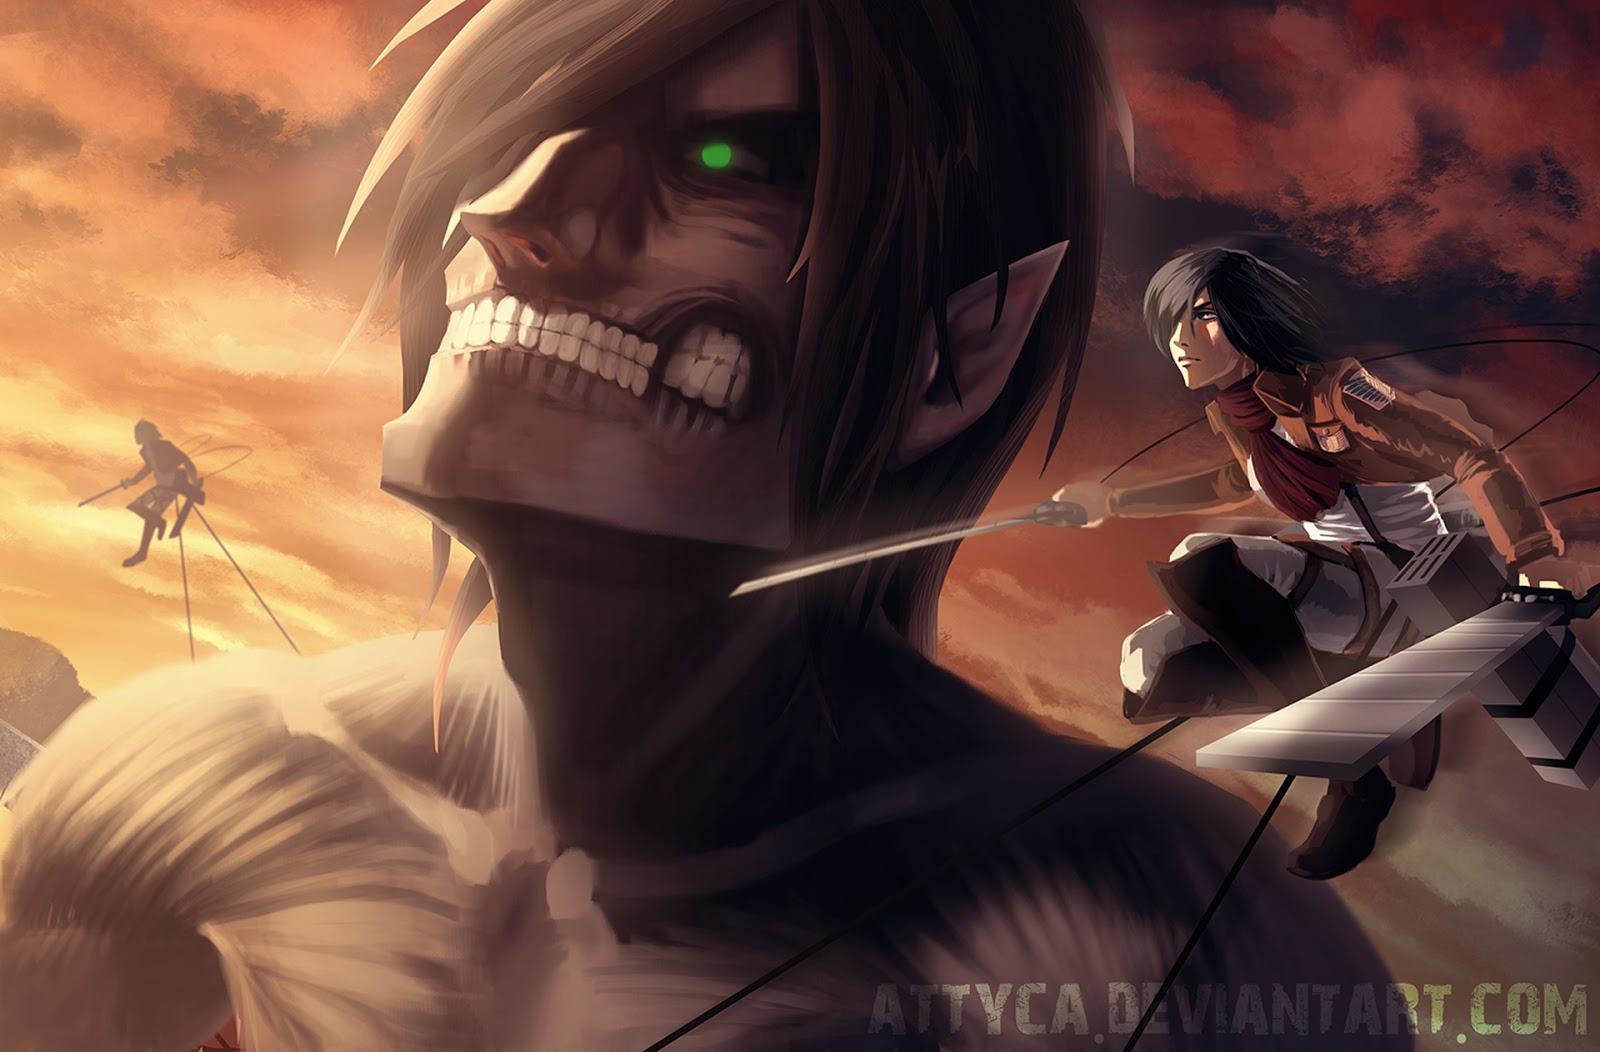 Attack On Titan Mobile Wallpapers  Latest Attack On Titan Mobile  Backgrounds  WallpaperTeg